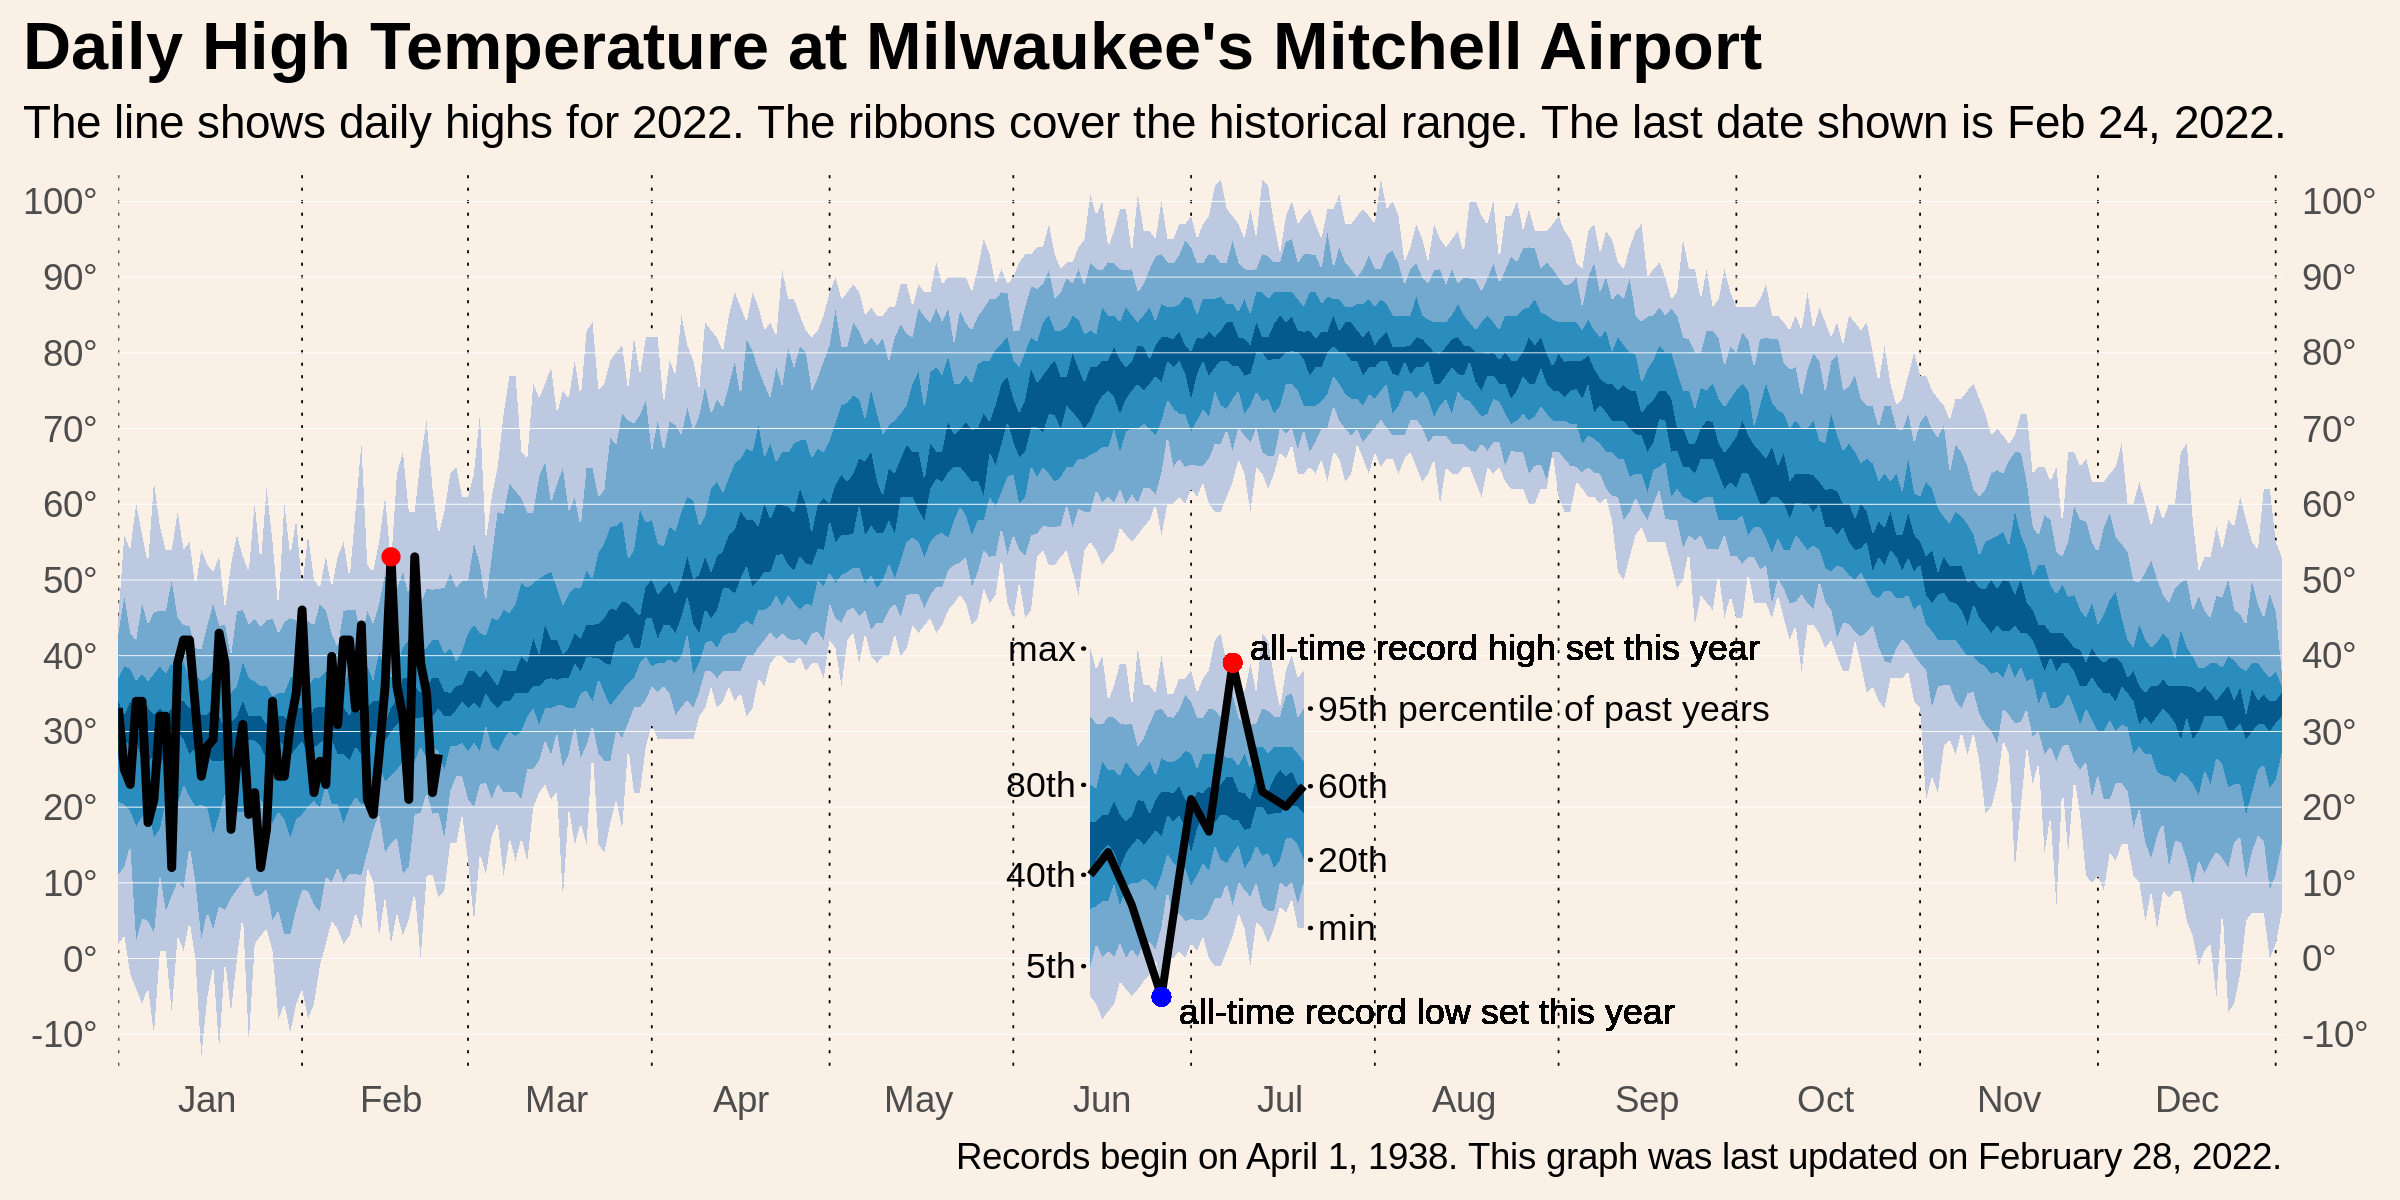 Daily High Temperature in Milwaukee